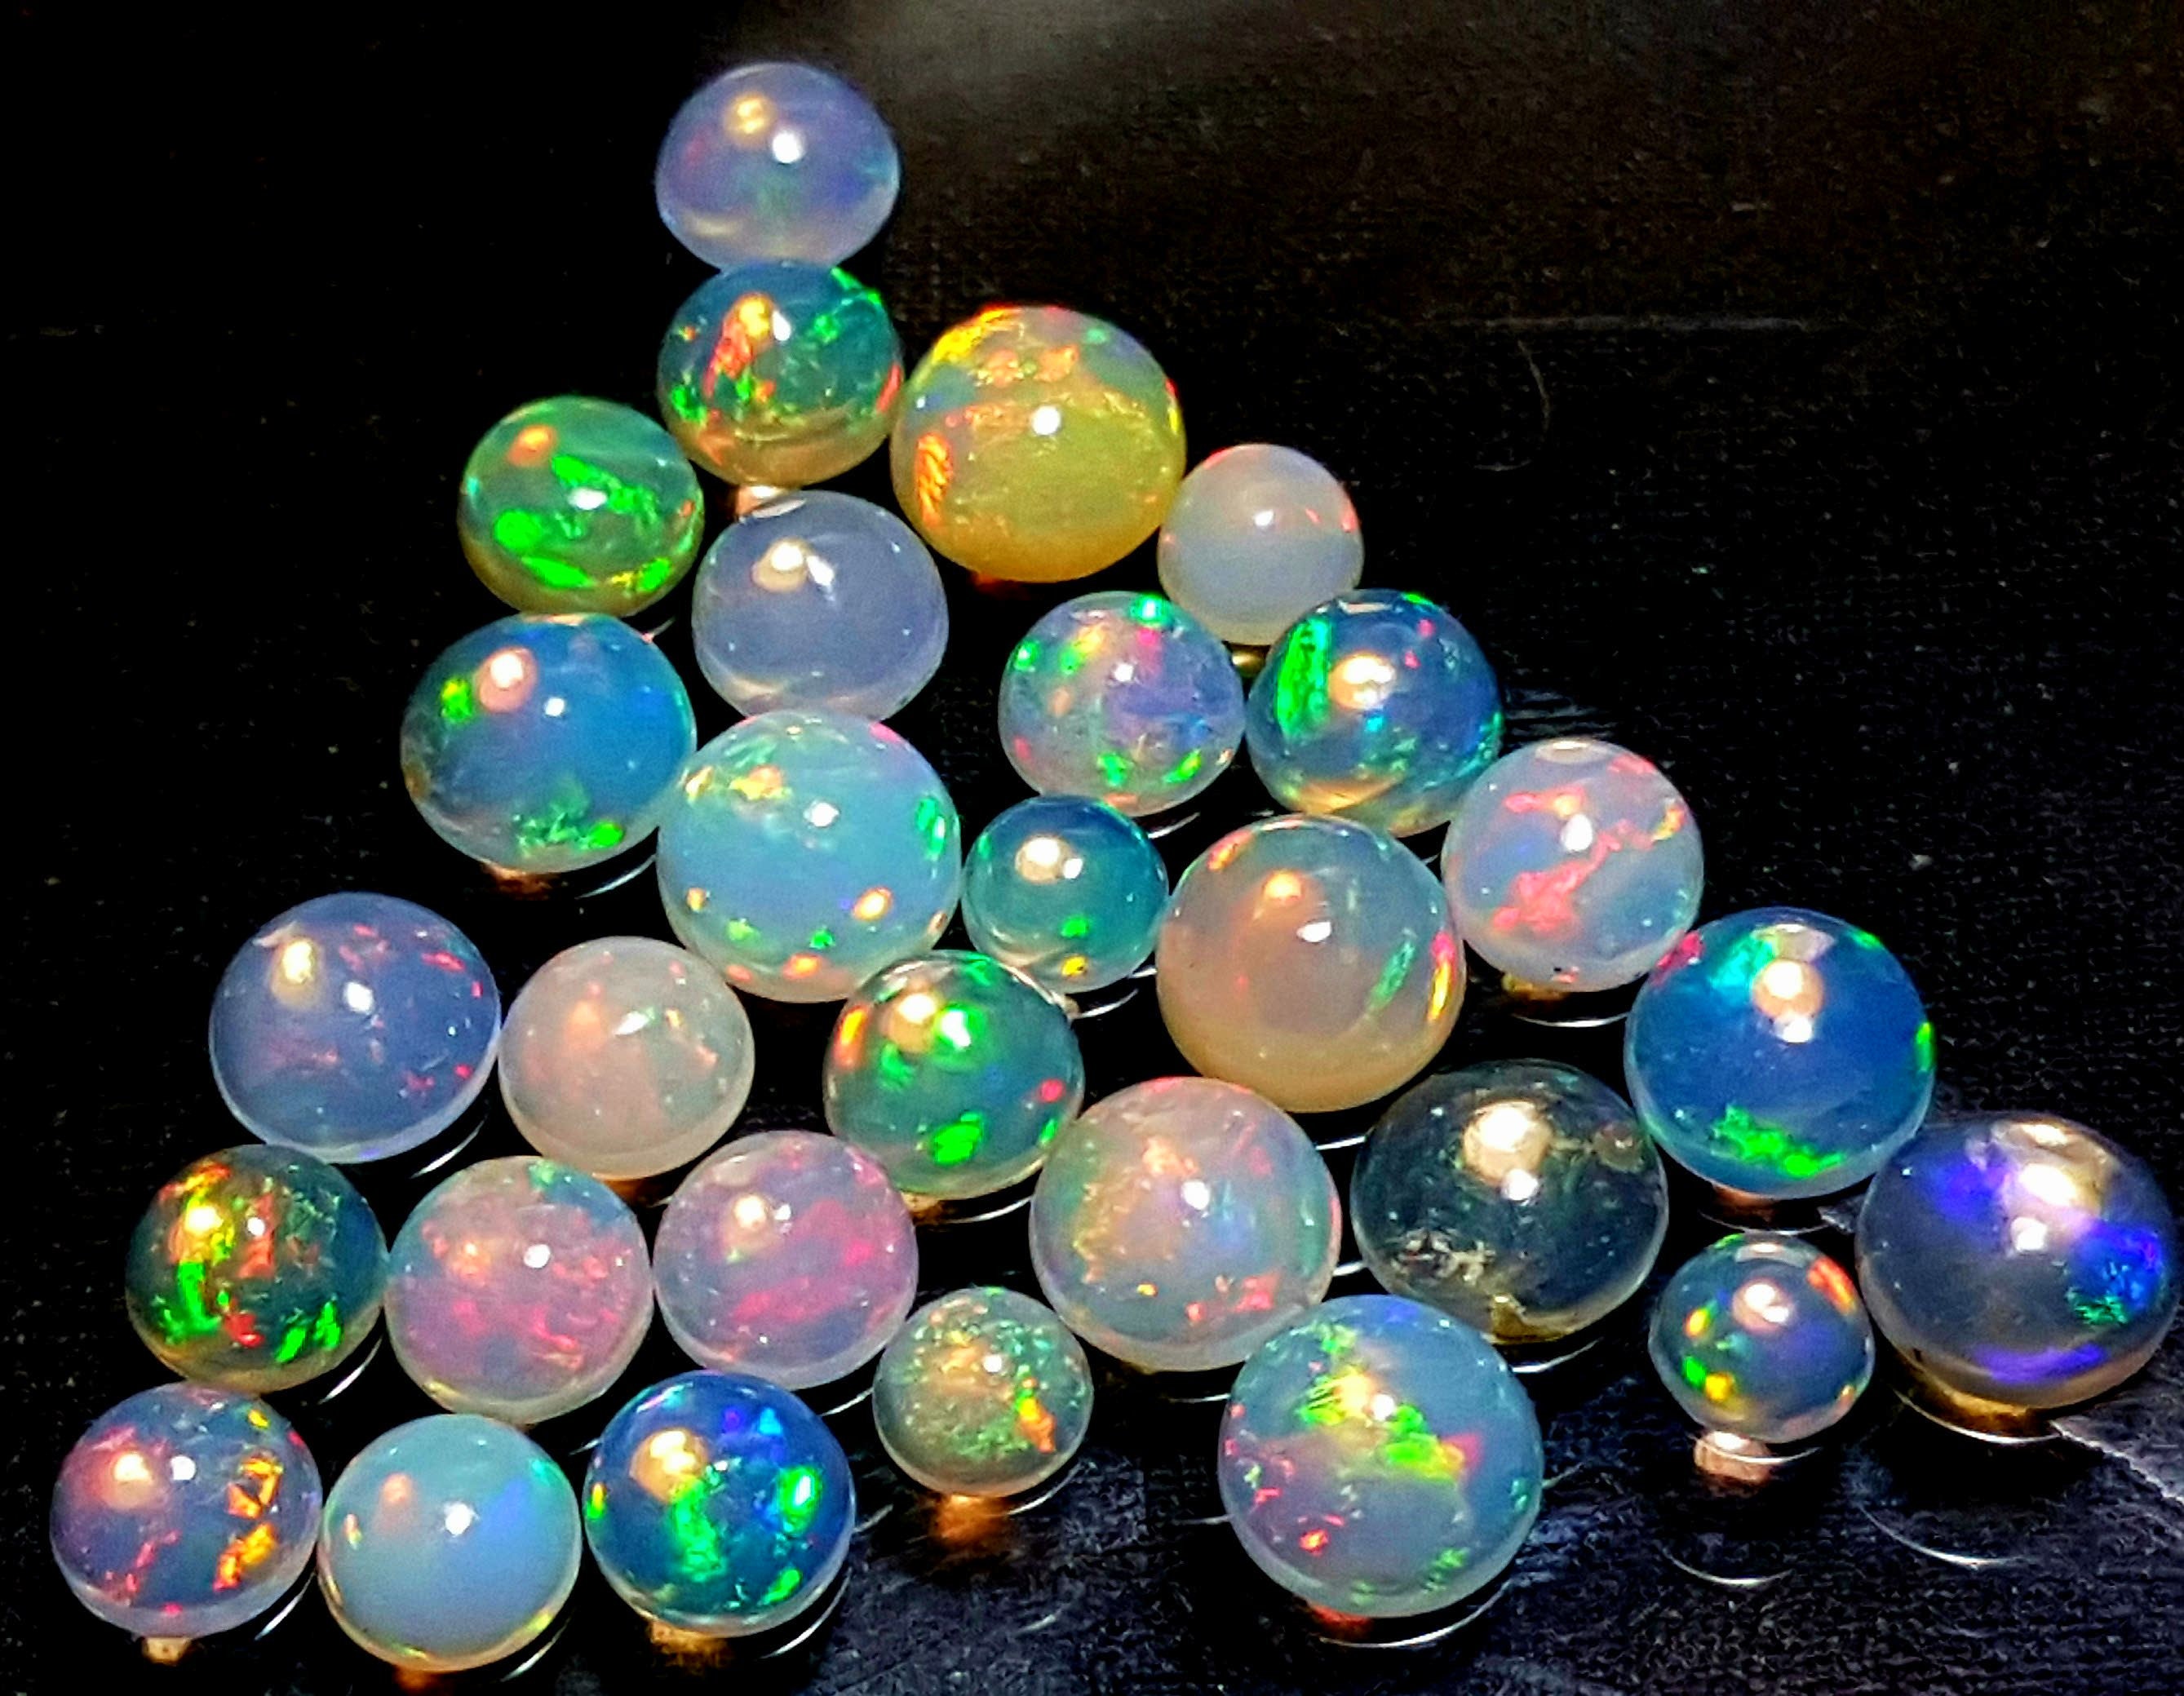 100% NATURAL ETHIOPIAN WELO FIRE OPAL ROUND SHAPE CABOCHON 4X4MM LOOSE GEMSTONE 